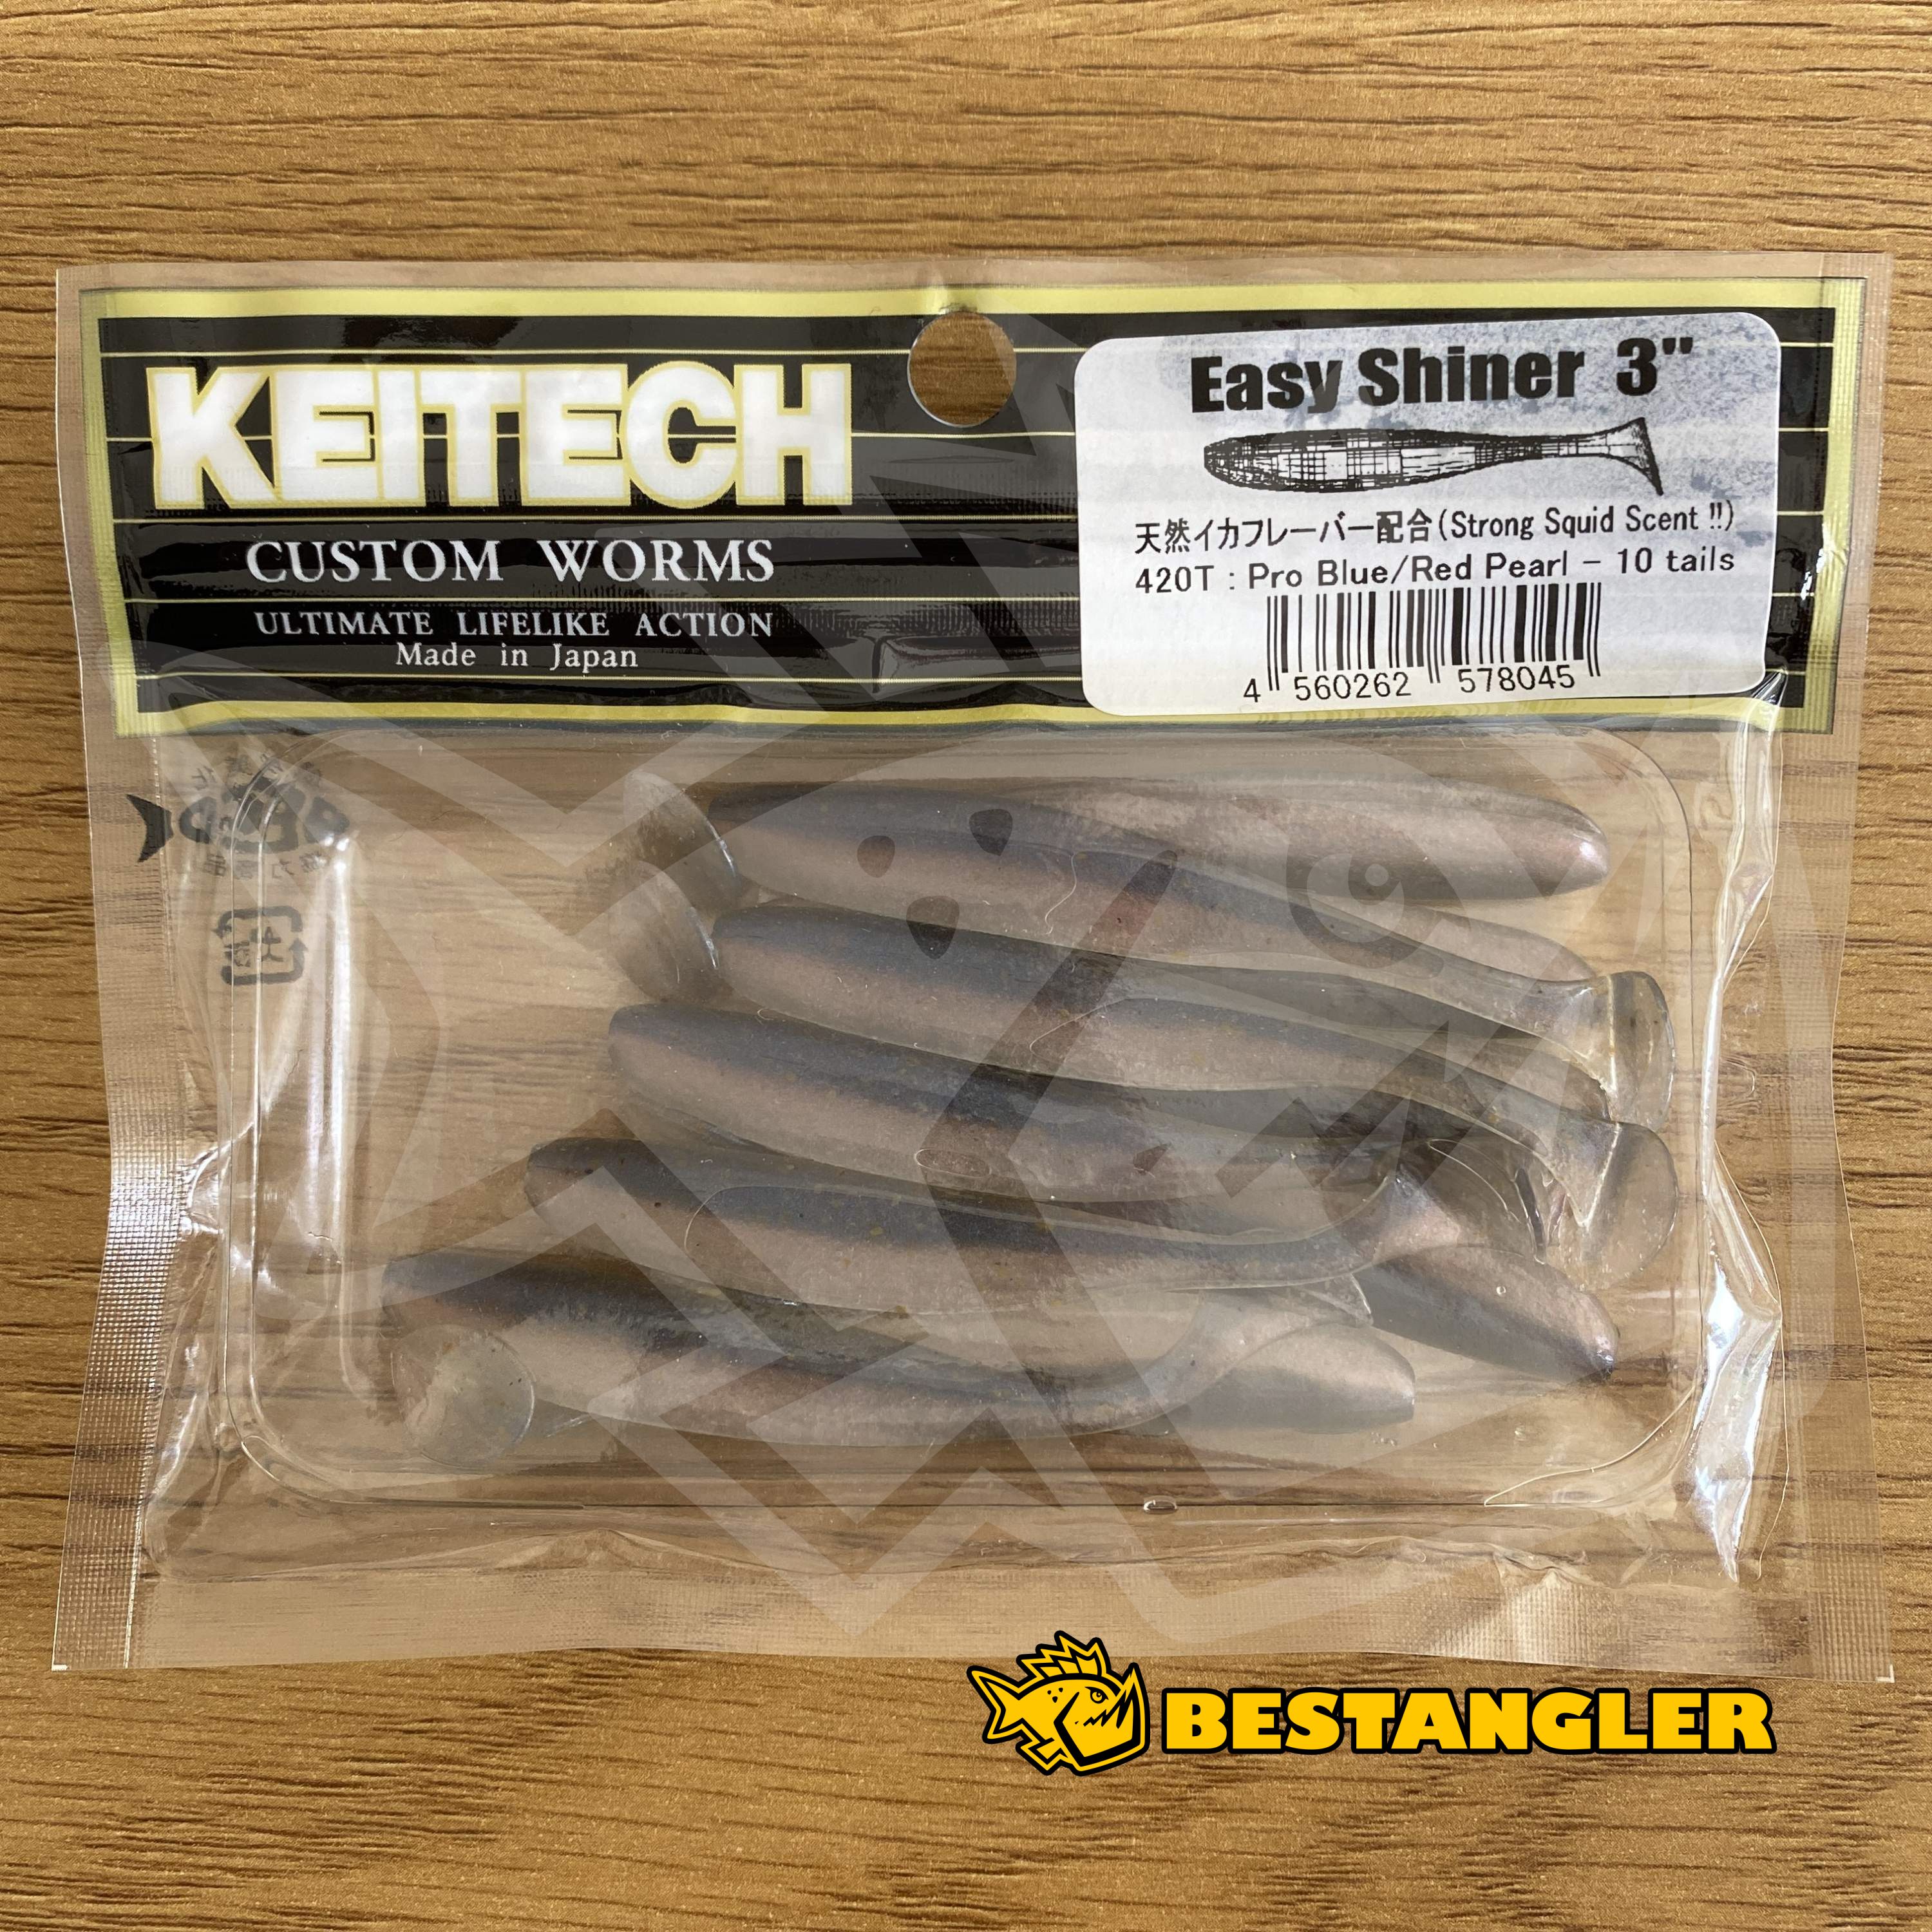 Keitech Easy Shiner 3 Pro Blue / Red Pearl